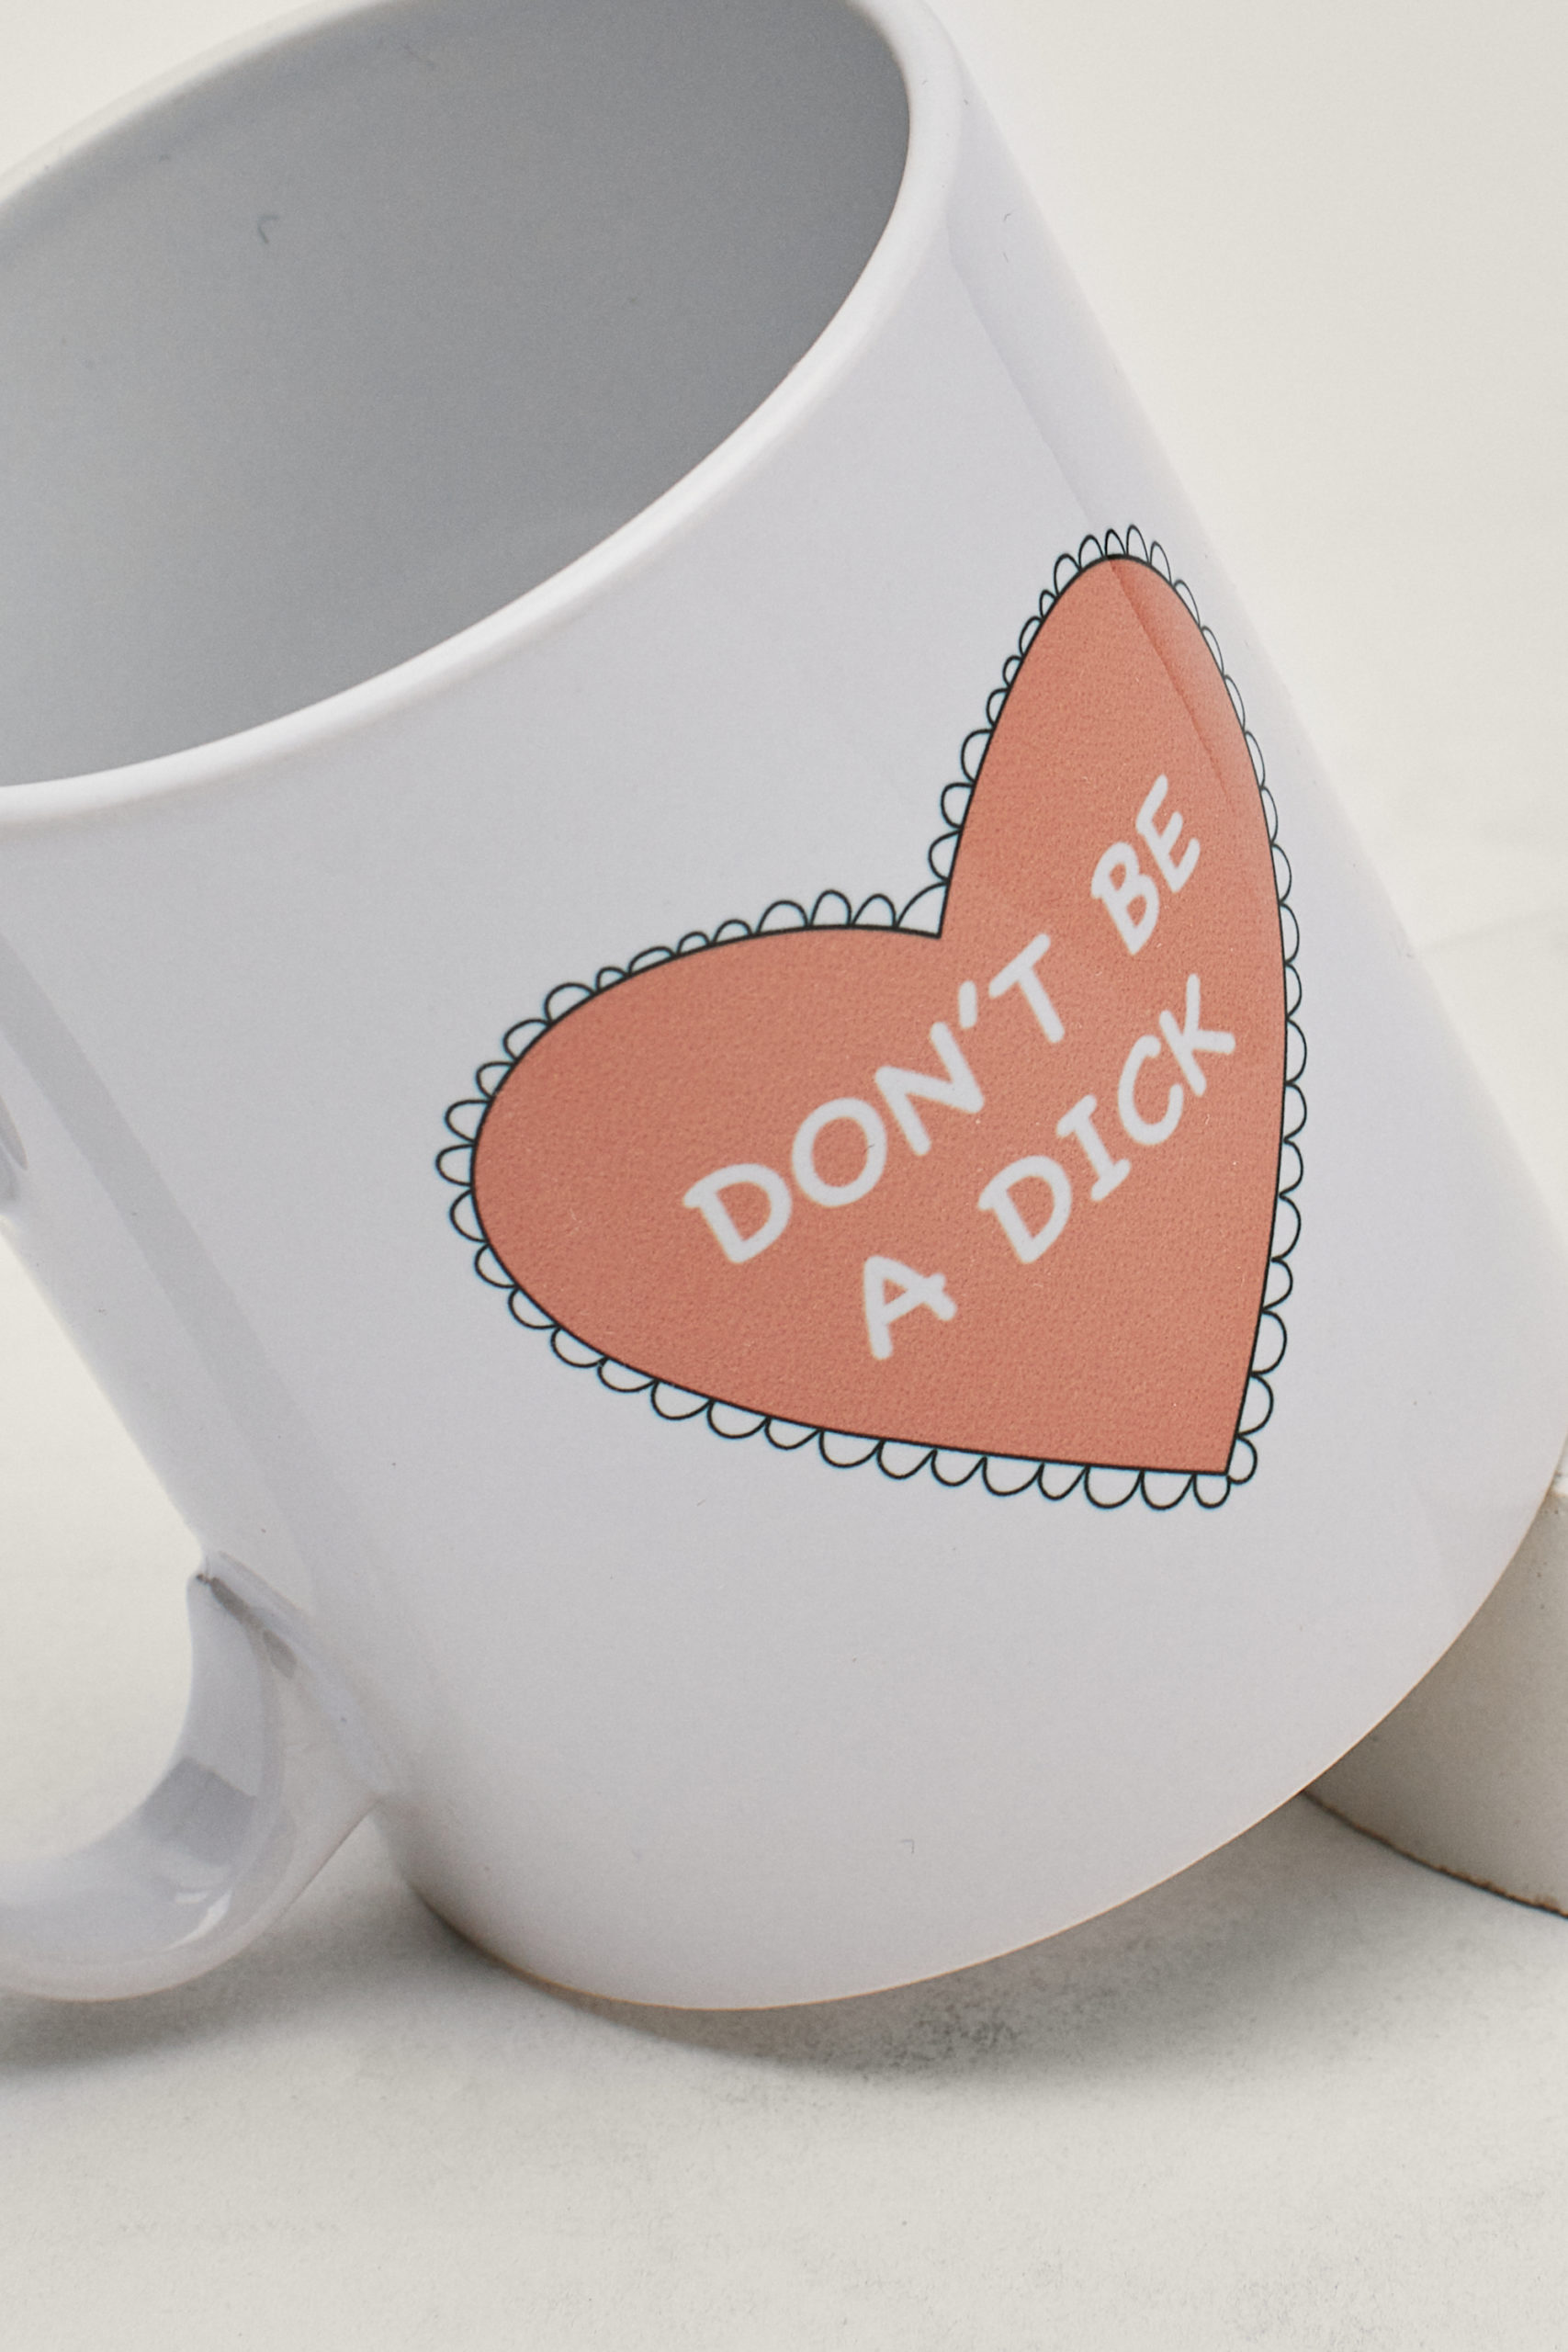 Don't Be A Dick Heart Graphic Mug